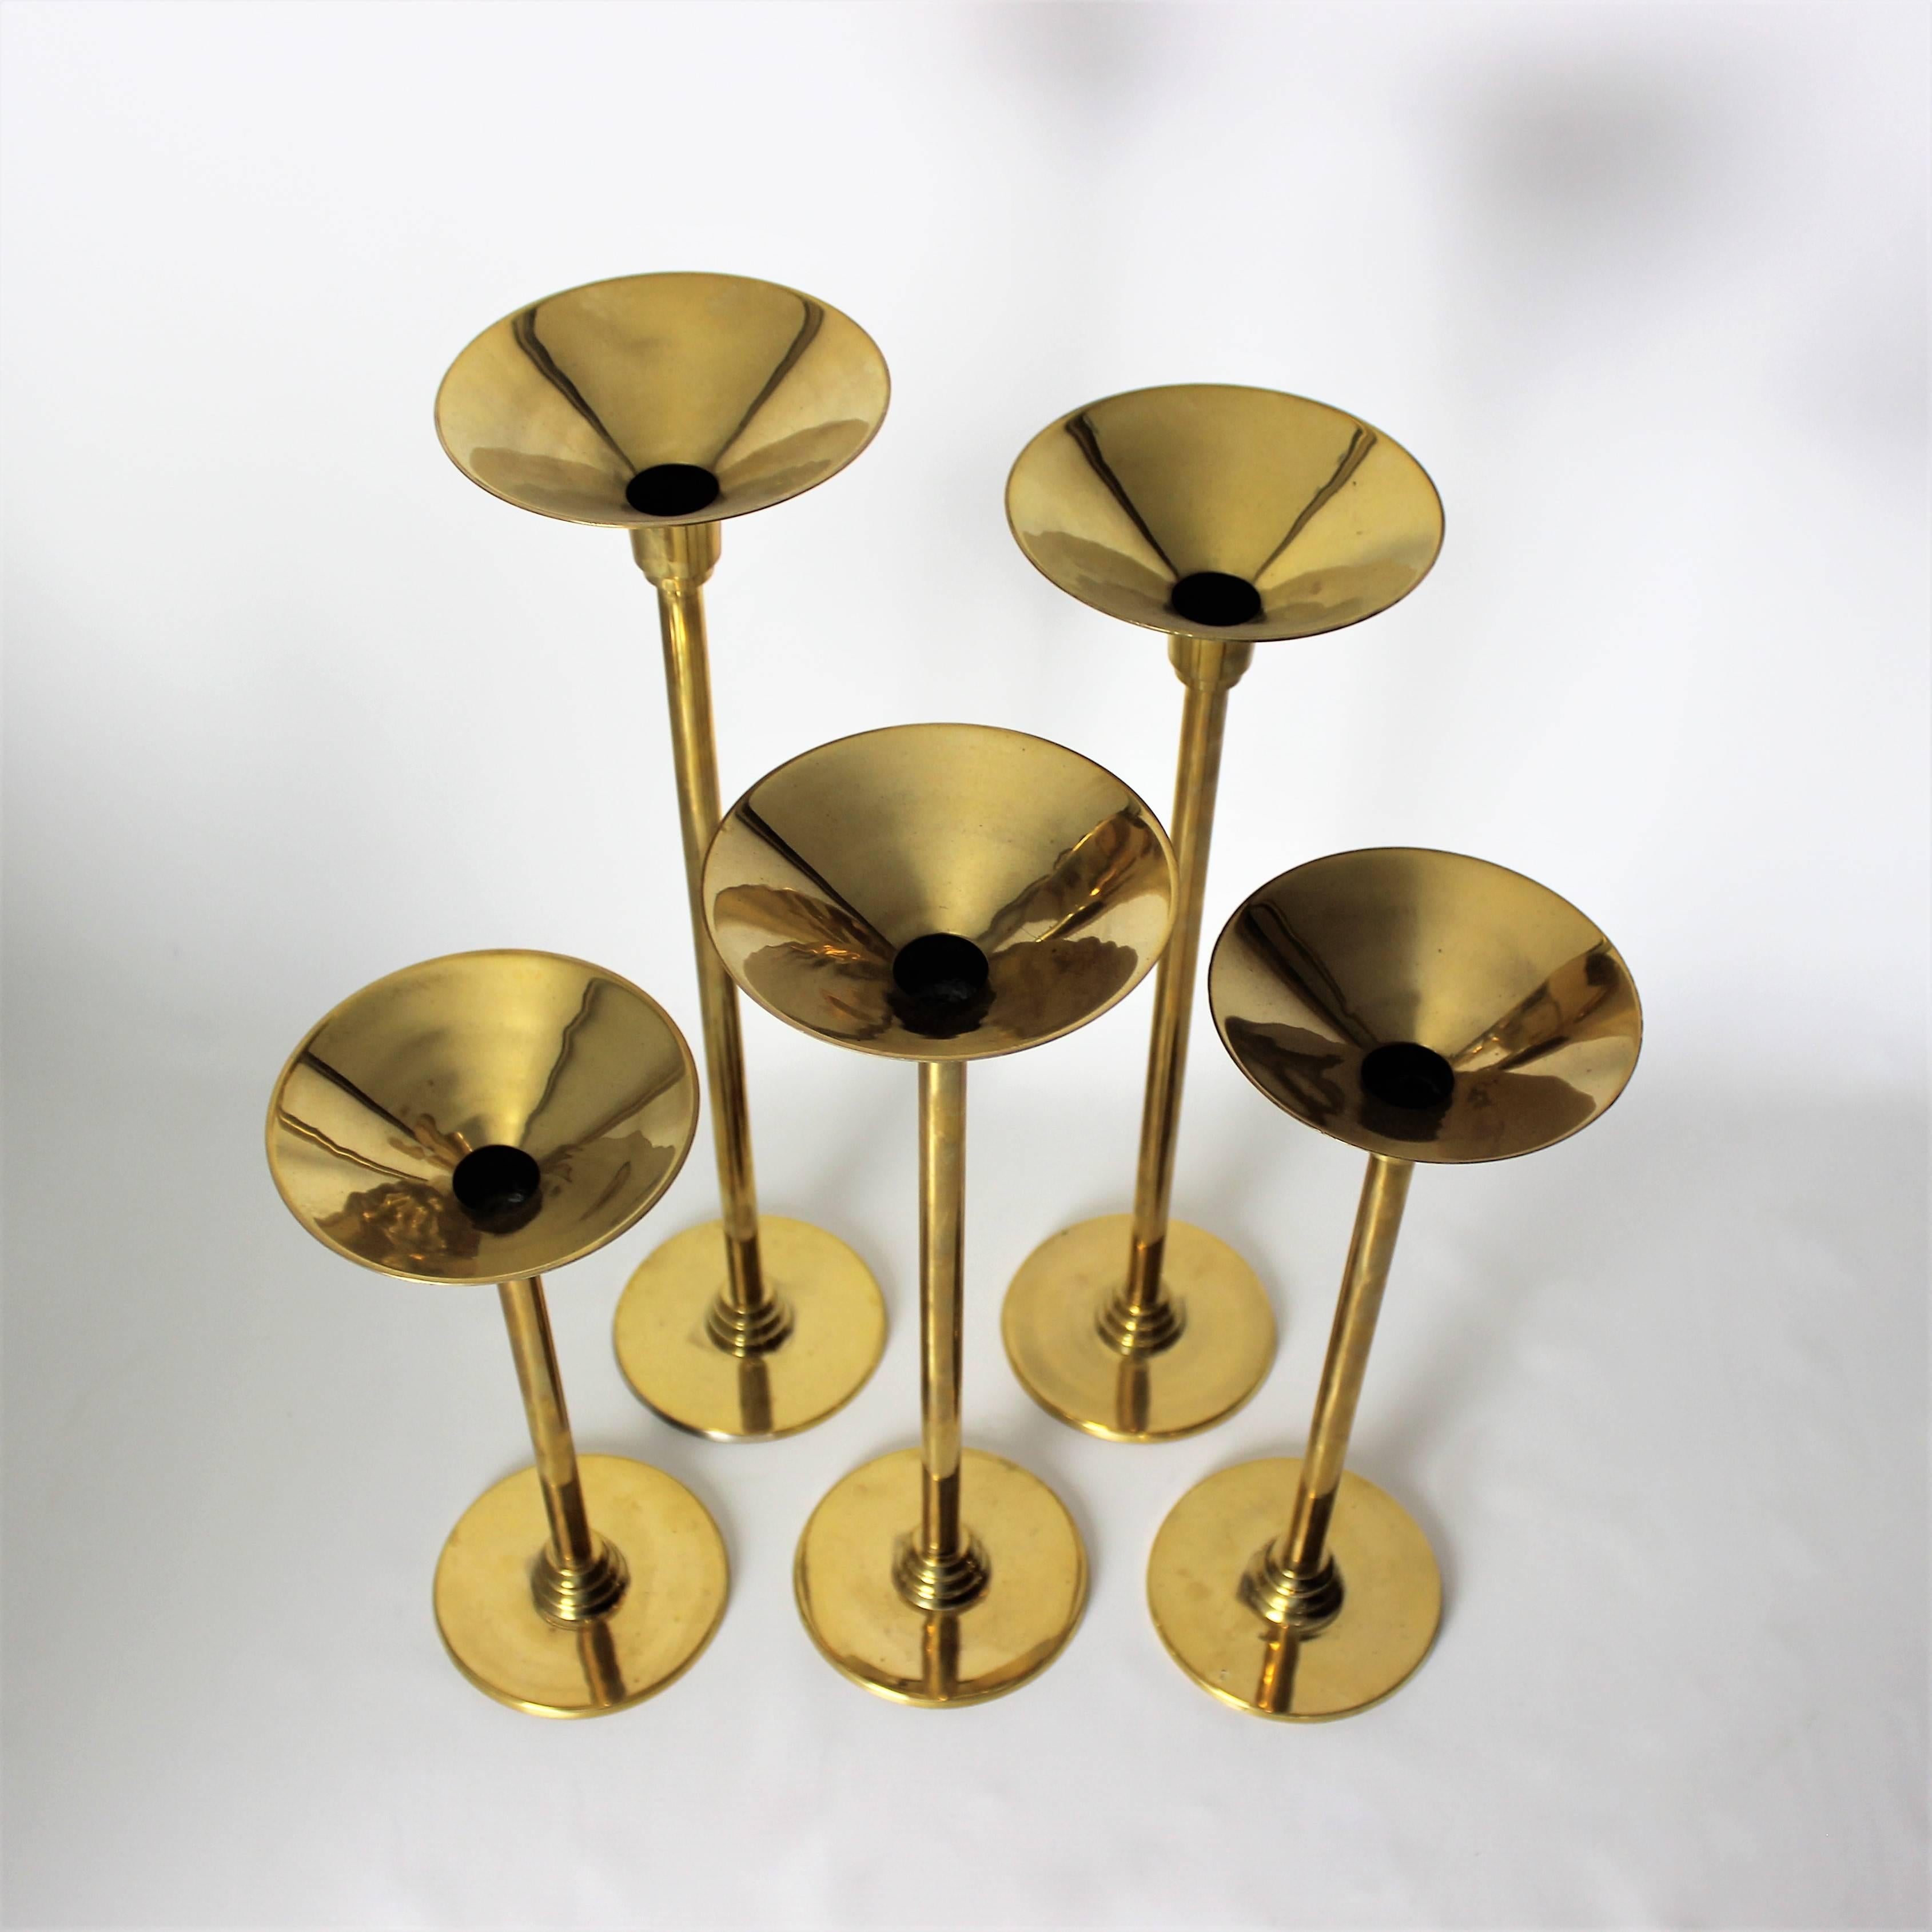 Late 20th Century Commanding 1970s Art Deco Revival Brass Candleholders in Graduated Heights